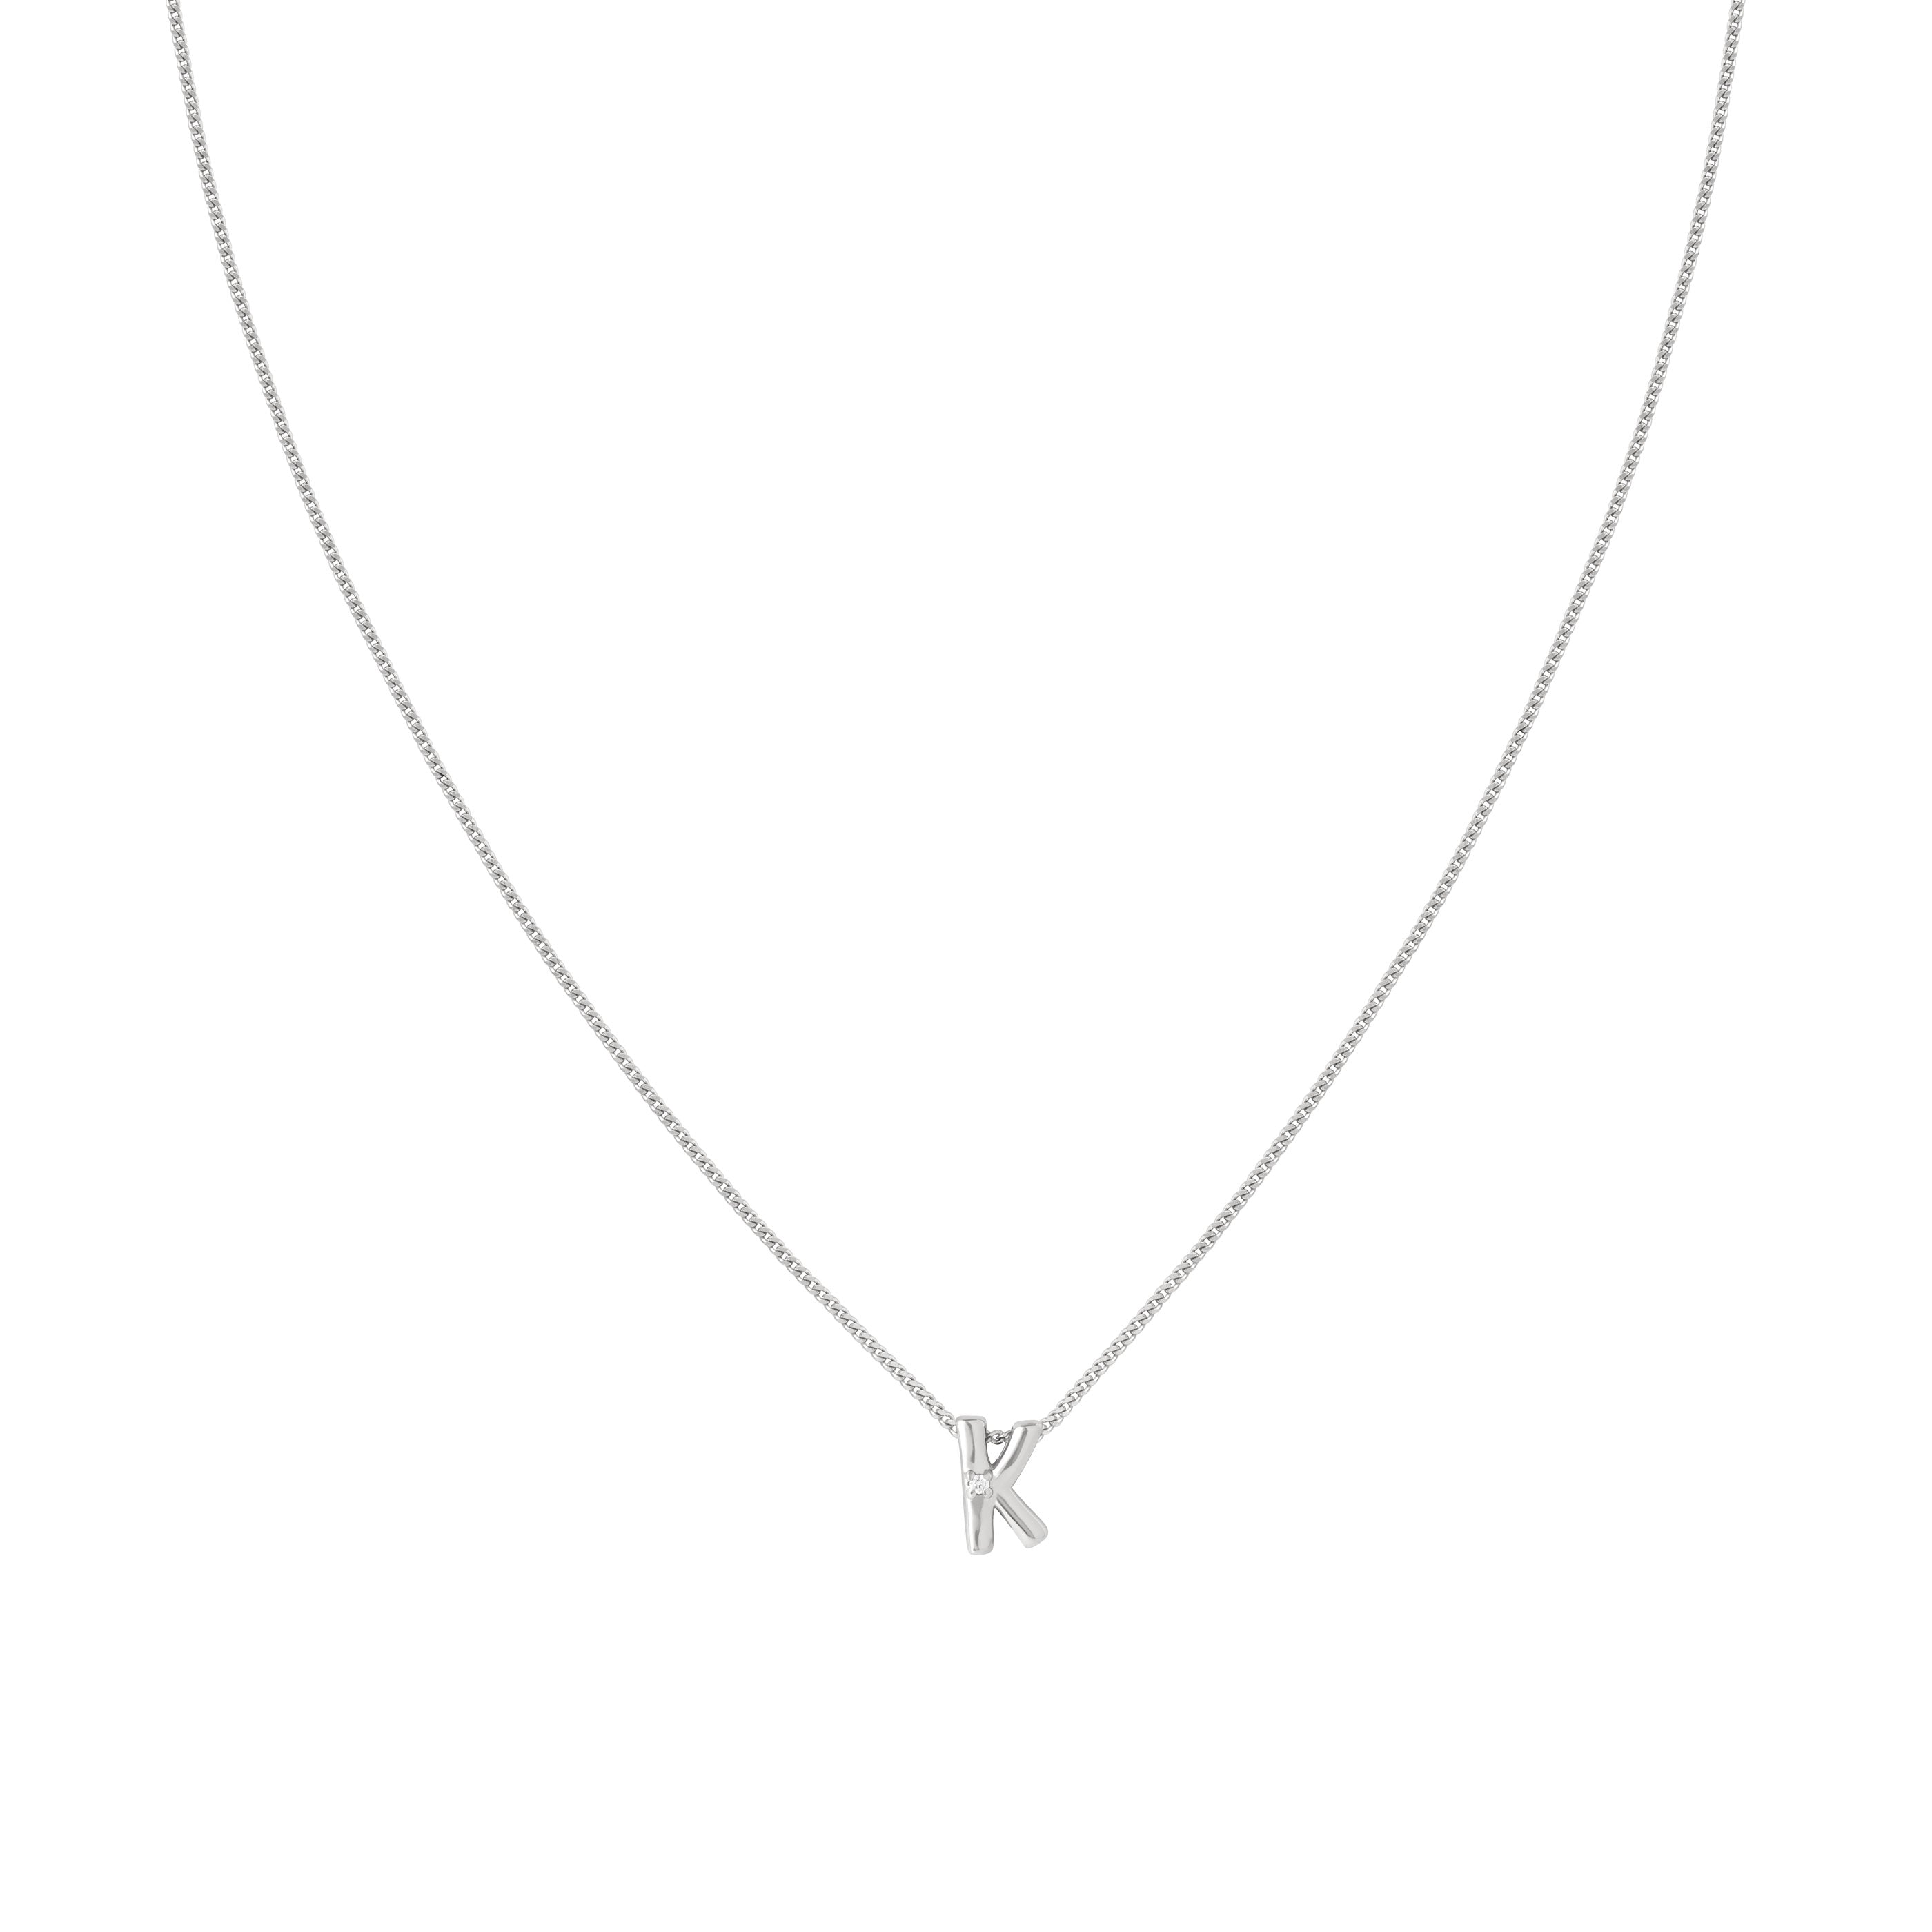 K Initial Pendant Necklace in Silver